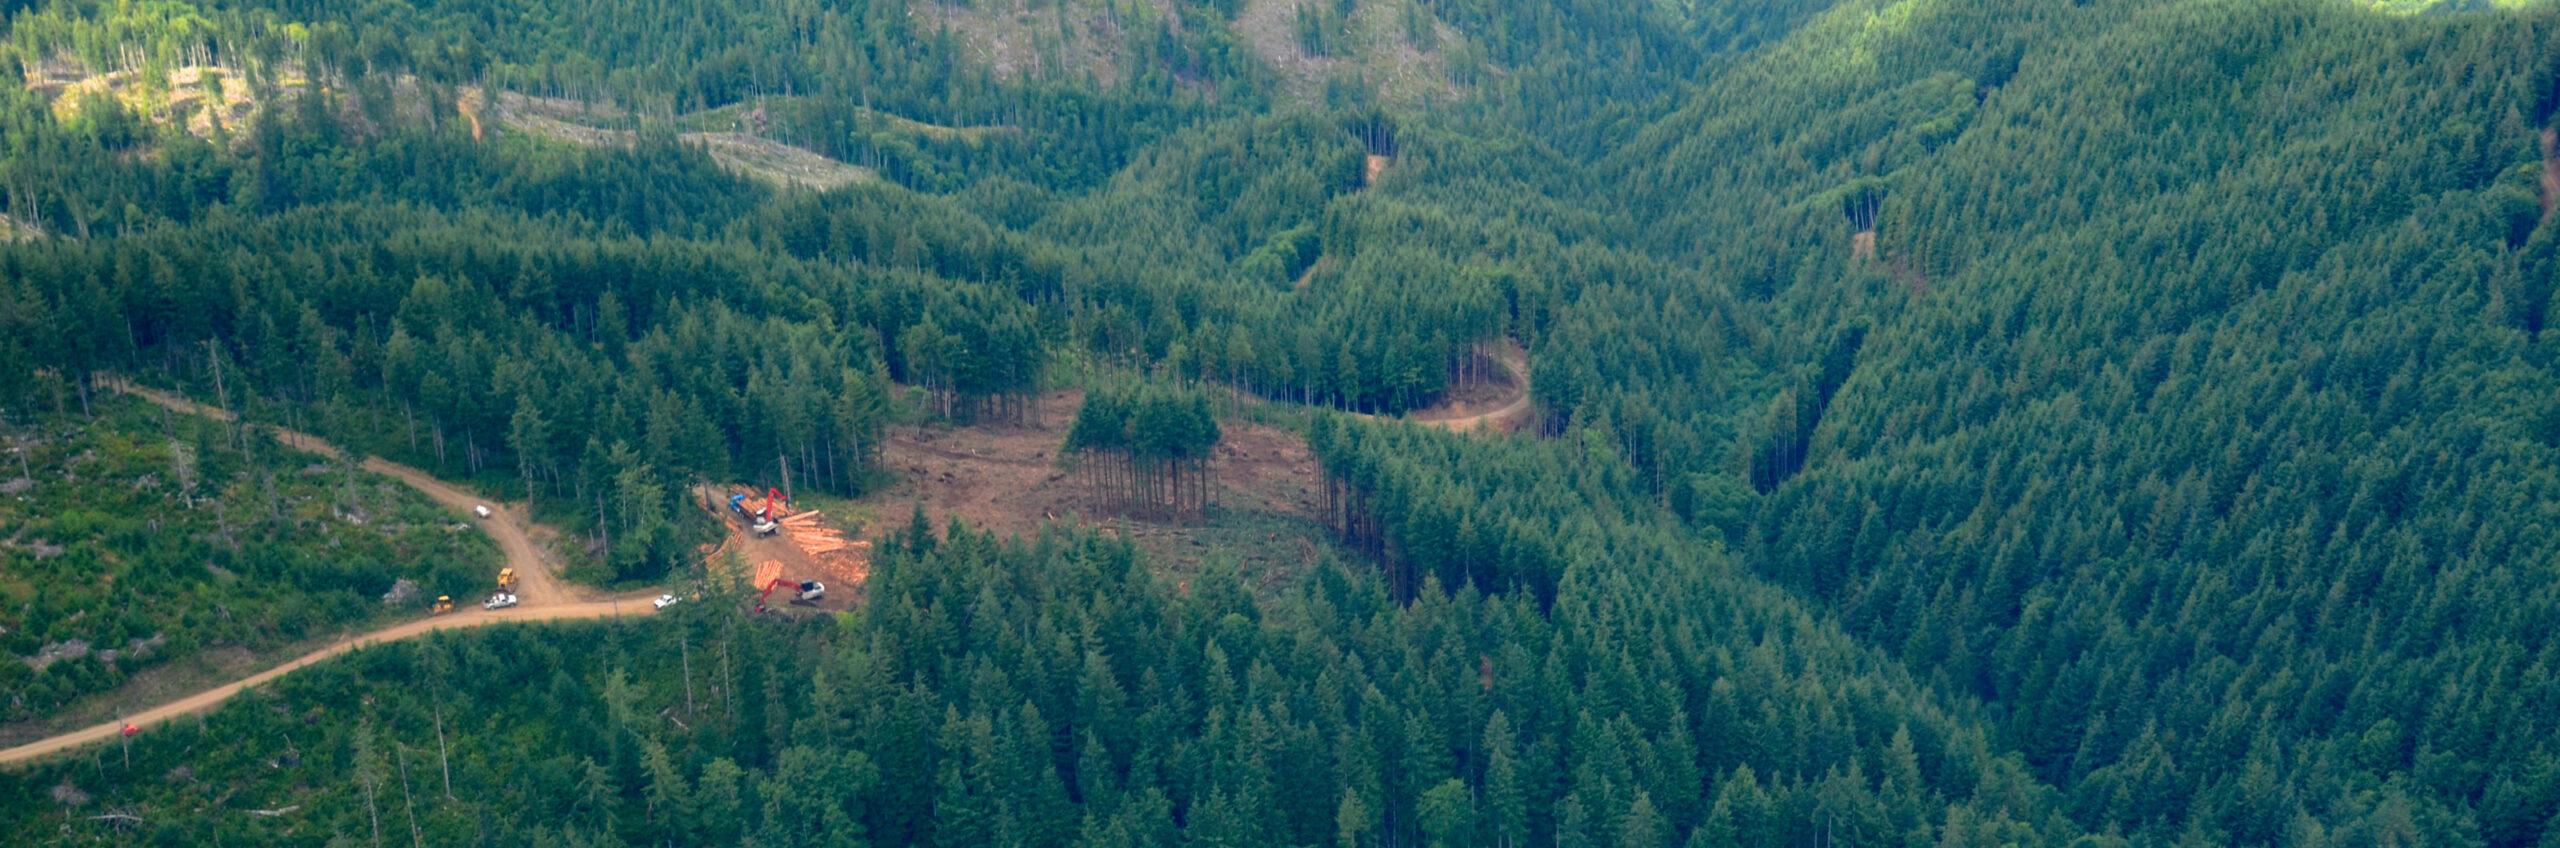 High view of green hills covered with tall, uniform conifers dip to a green drainage. At left, a logging road and tree harvesting site are bright orange-brown, and the road continues deeper into the forest